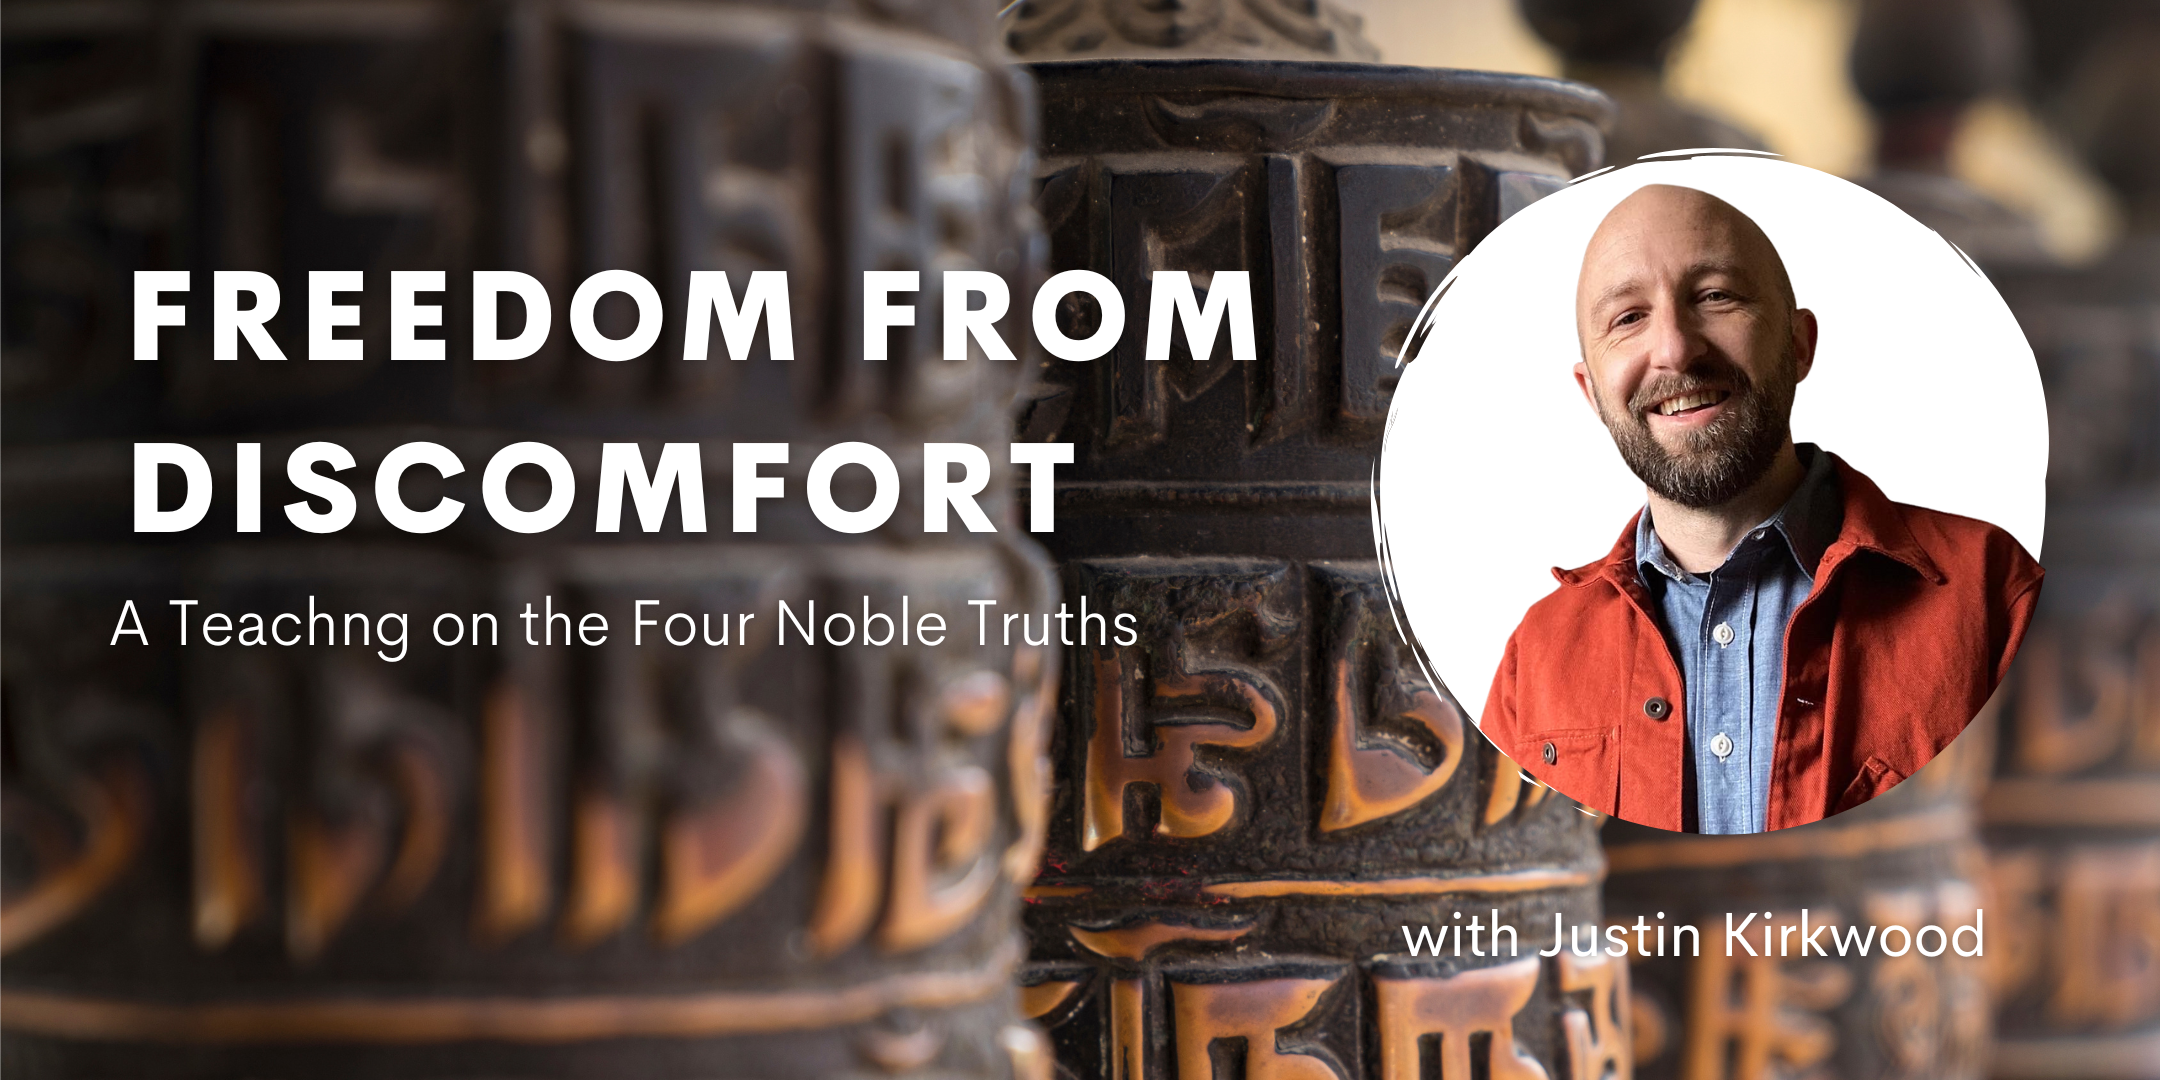 Freedom from discomfort - Four Noble Truths Teaching